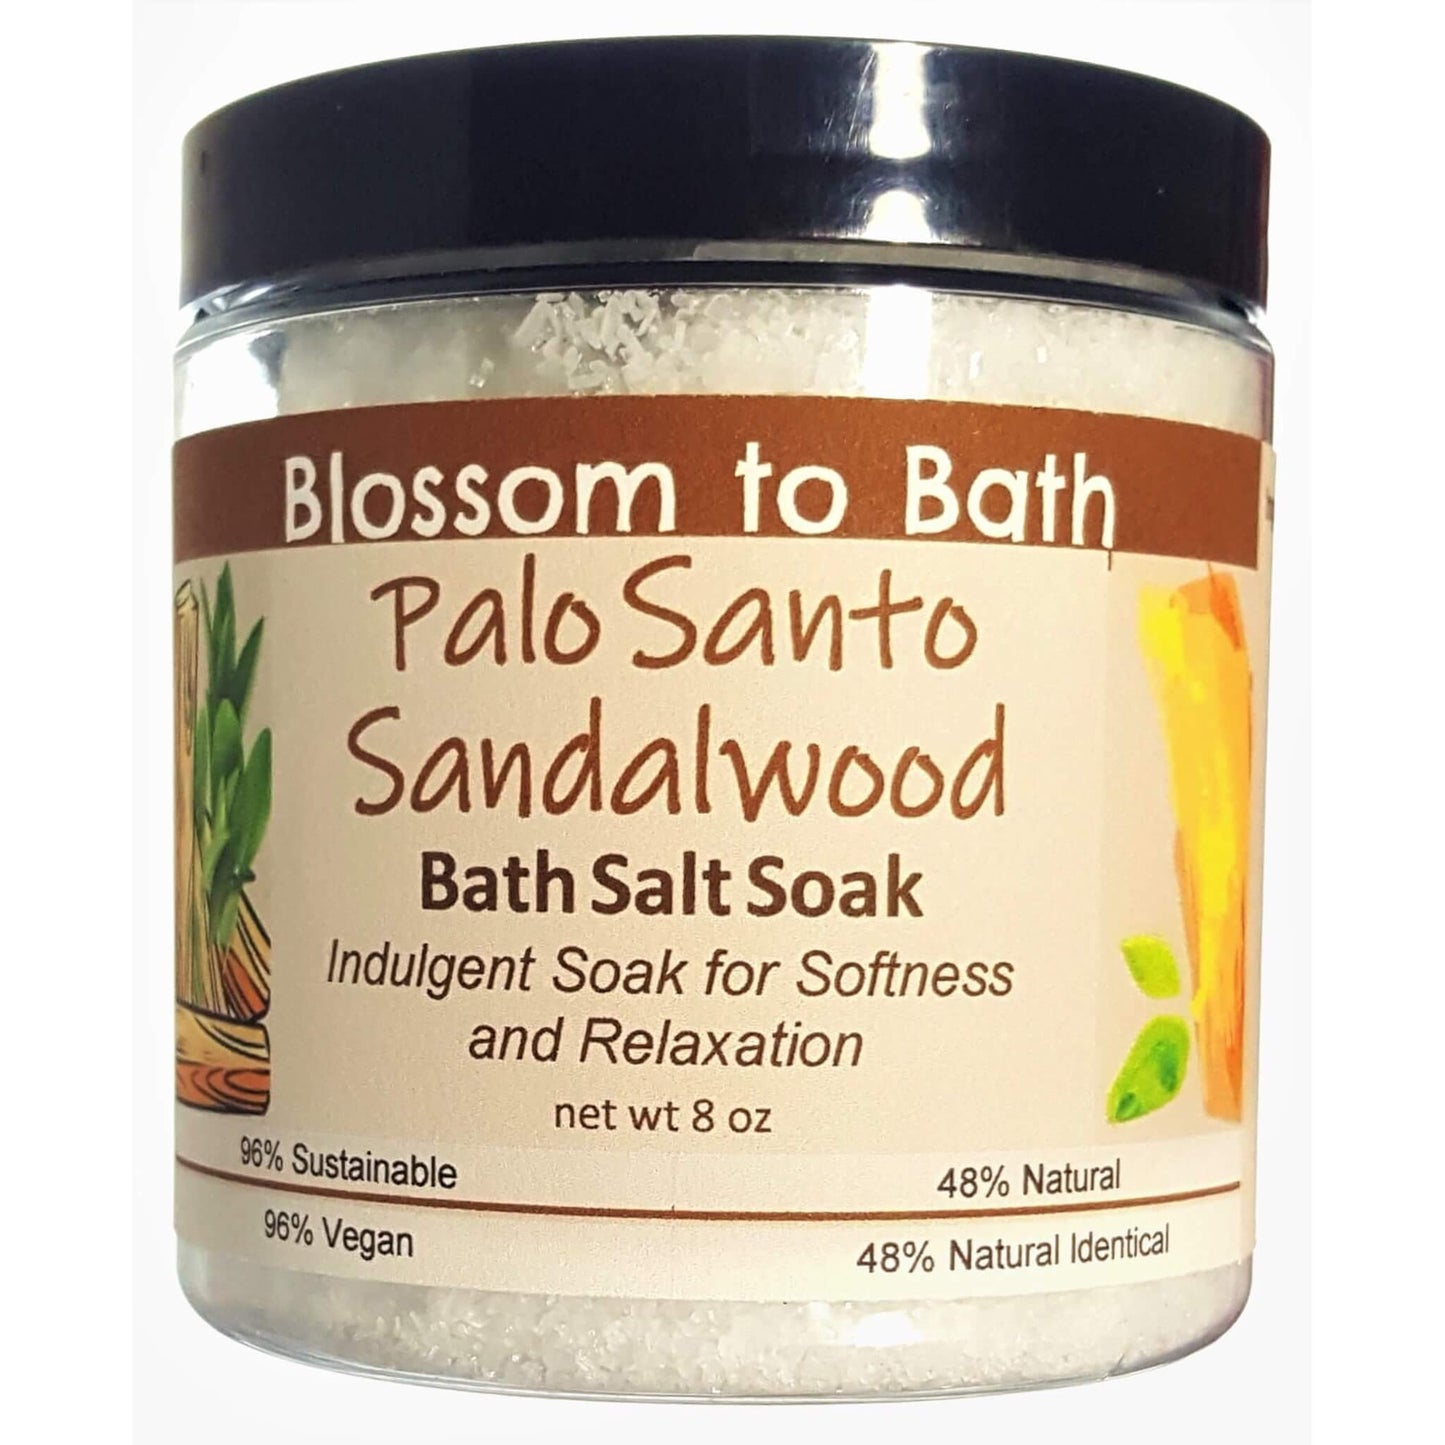 Buy Blossom to Bath Palo Santo Sandalwood Bath Salt Soak from Flowersong Soap Studio.  Scented epsom salts for a luxurious soaking experience  A journey into the sacred, the exotic tones of this special blend resonate with warm woodiness that adds an uplifting vibration.